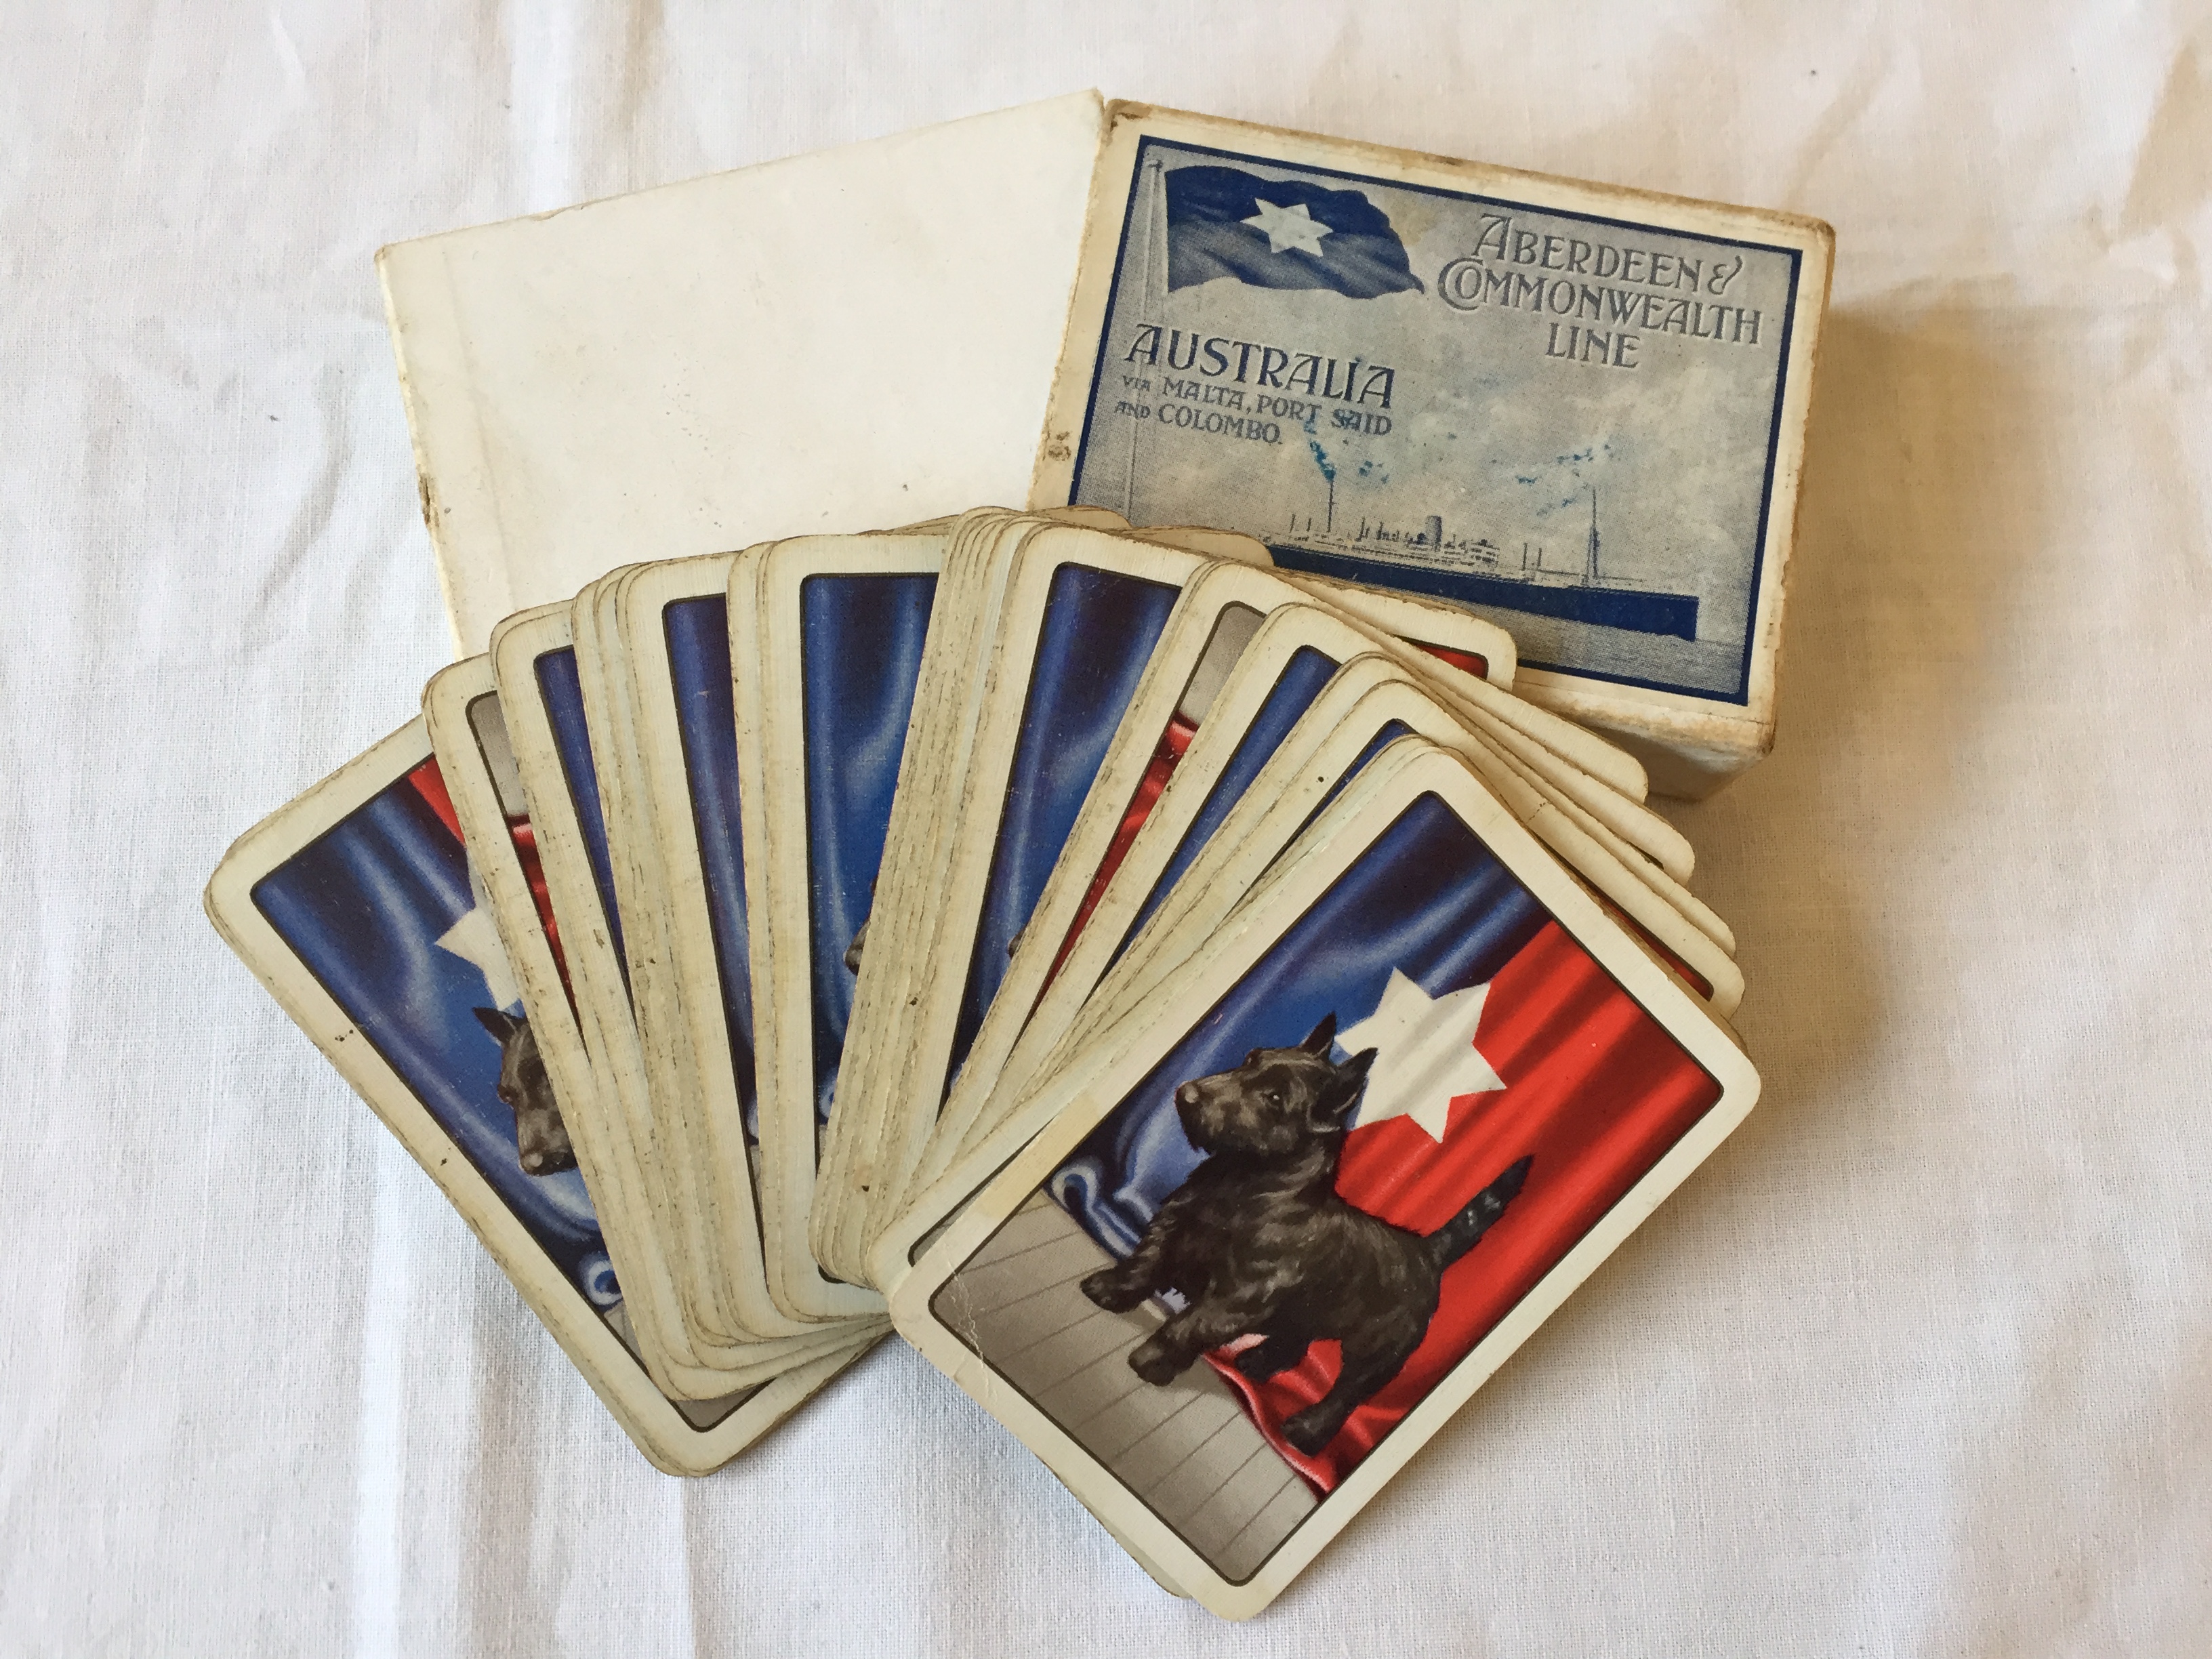 RARE SET OF PLAYING CARDS FROM THE ABERDEEN AND COMMONWEALTH LINE